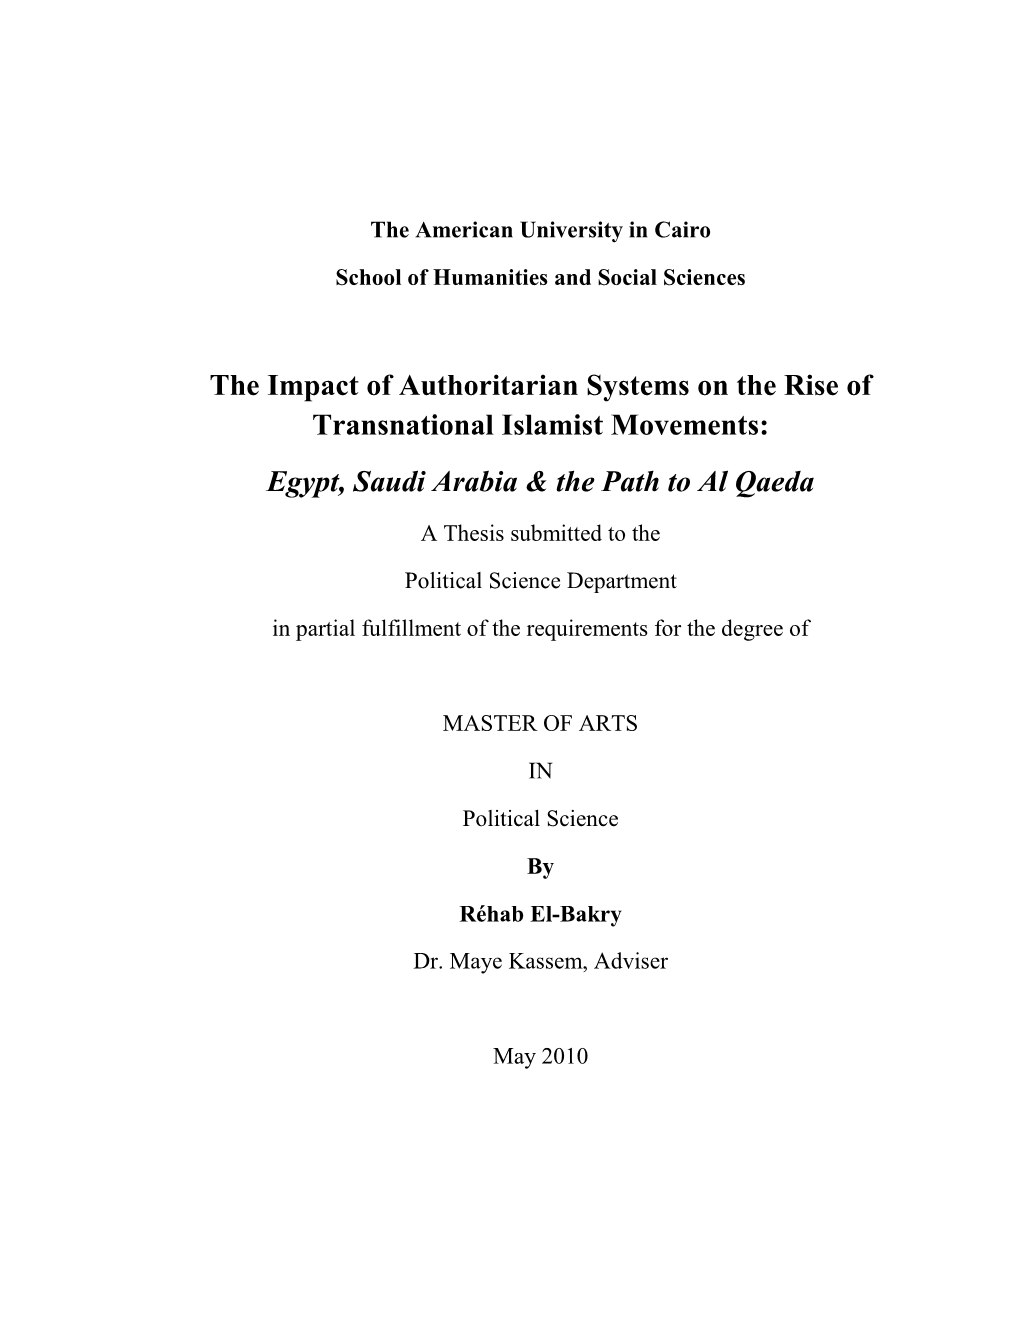 The Impact of Authoritarian Systems on the Rise of Transnational Islamist Movements